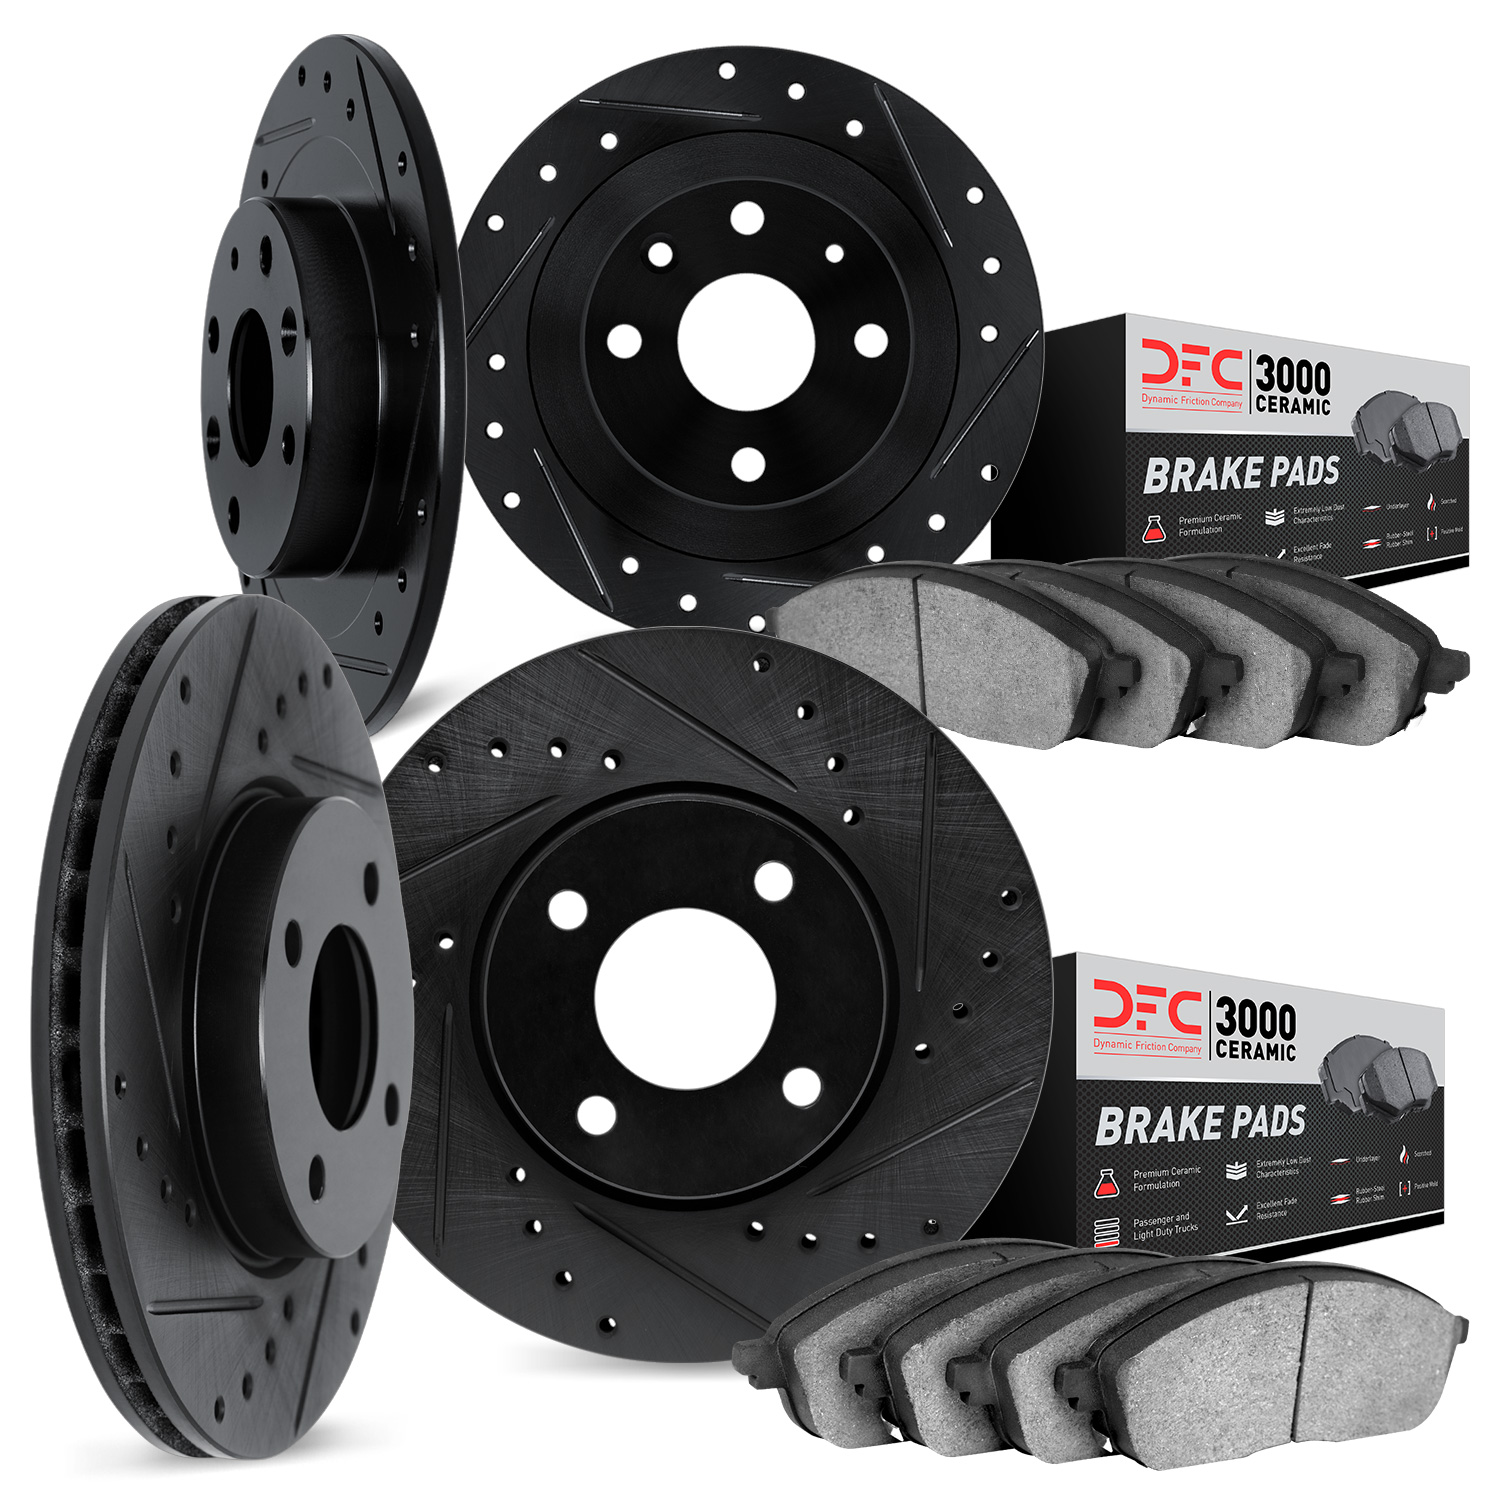 8304-59047 Drilled/Slotted Brake Rotors with 3000-Series Ceramic Brake Pads Kit [Black], 1994-1997 Acura/Honda, Position: Front